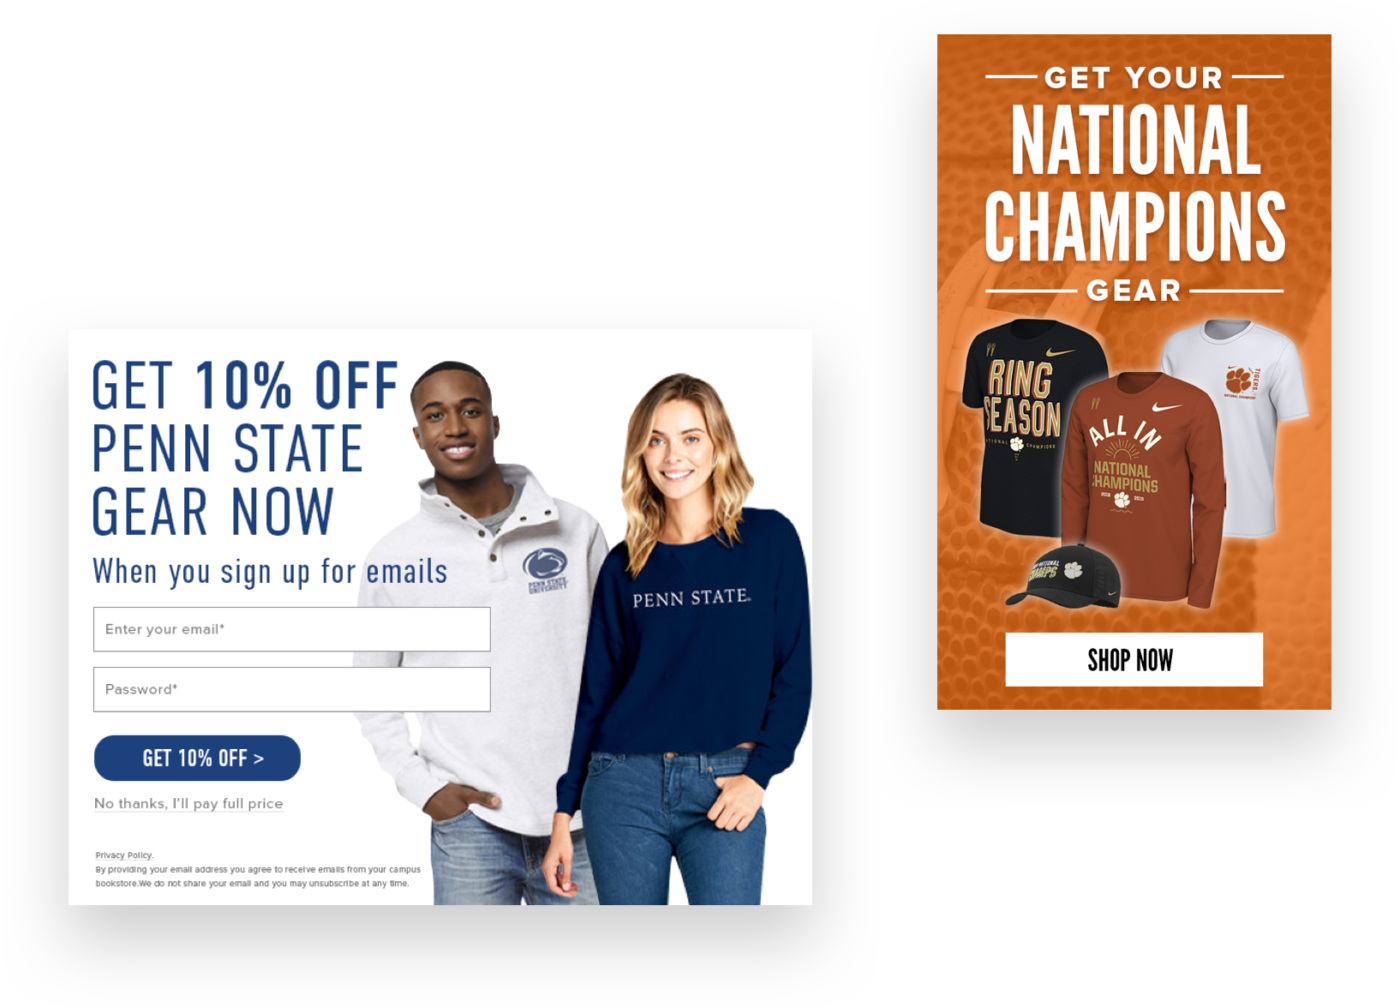 Showing marketing ads. One showing 10% OFF on PENN State; another showing NATIONAL CHAMPIONS gear